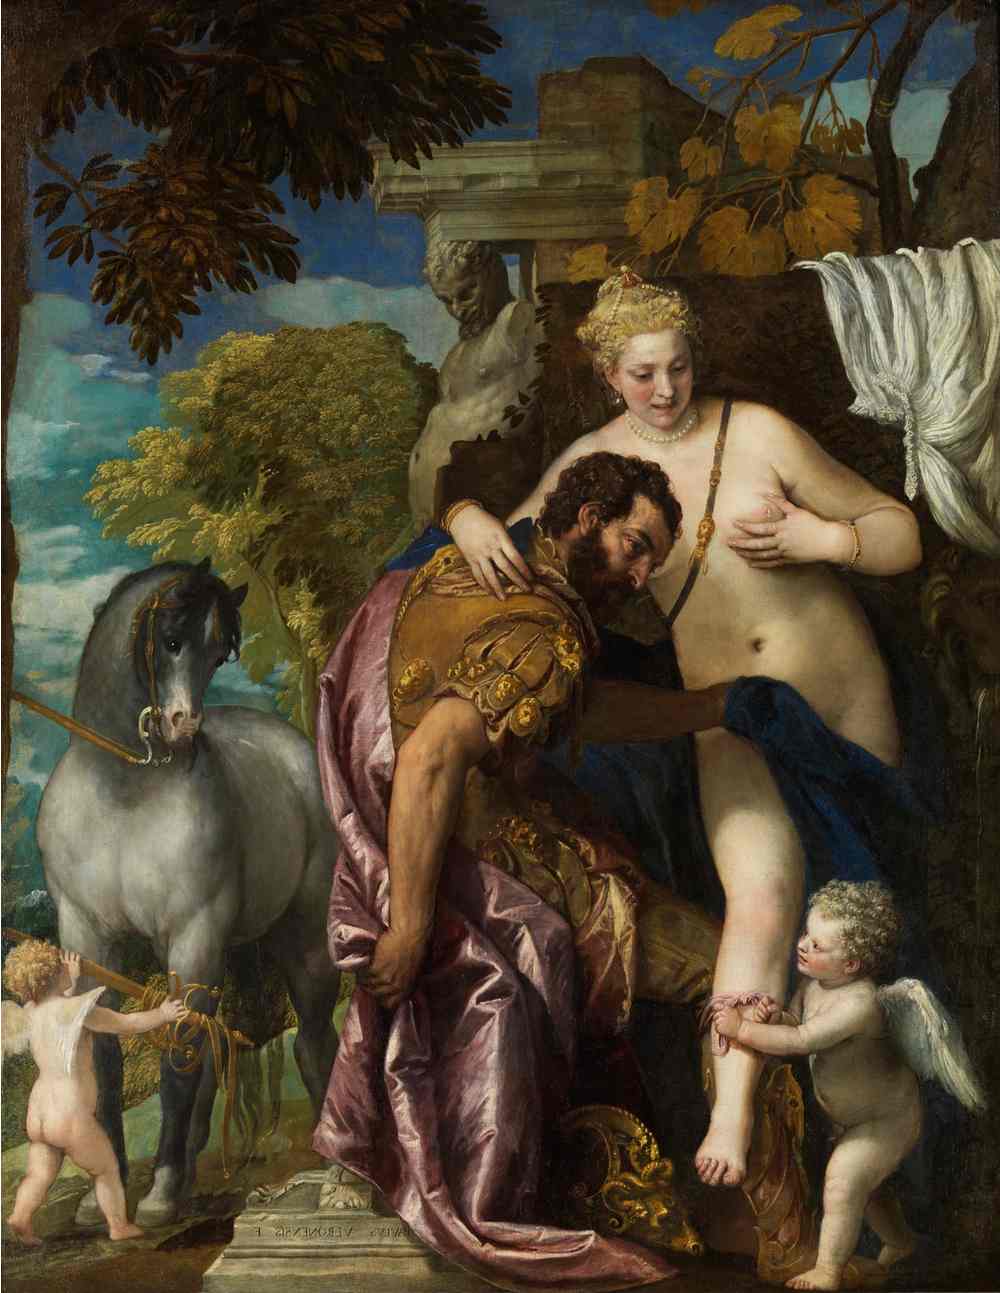 A Cupid Greek mythology painting, where he is tying a love knot around his parents, Venus and Mars.